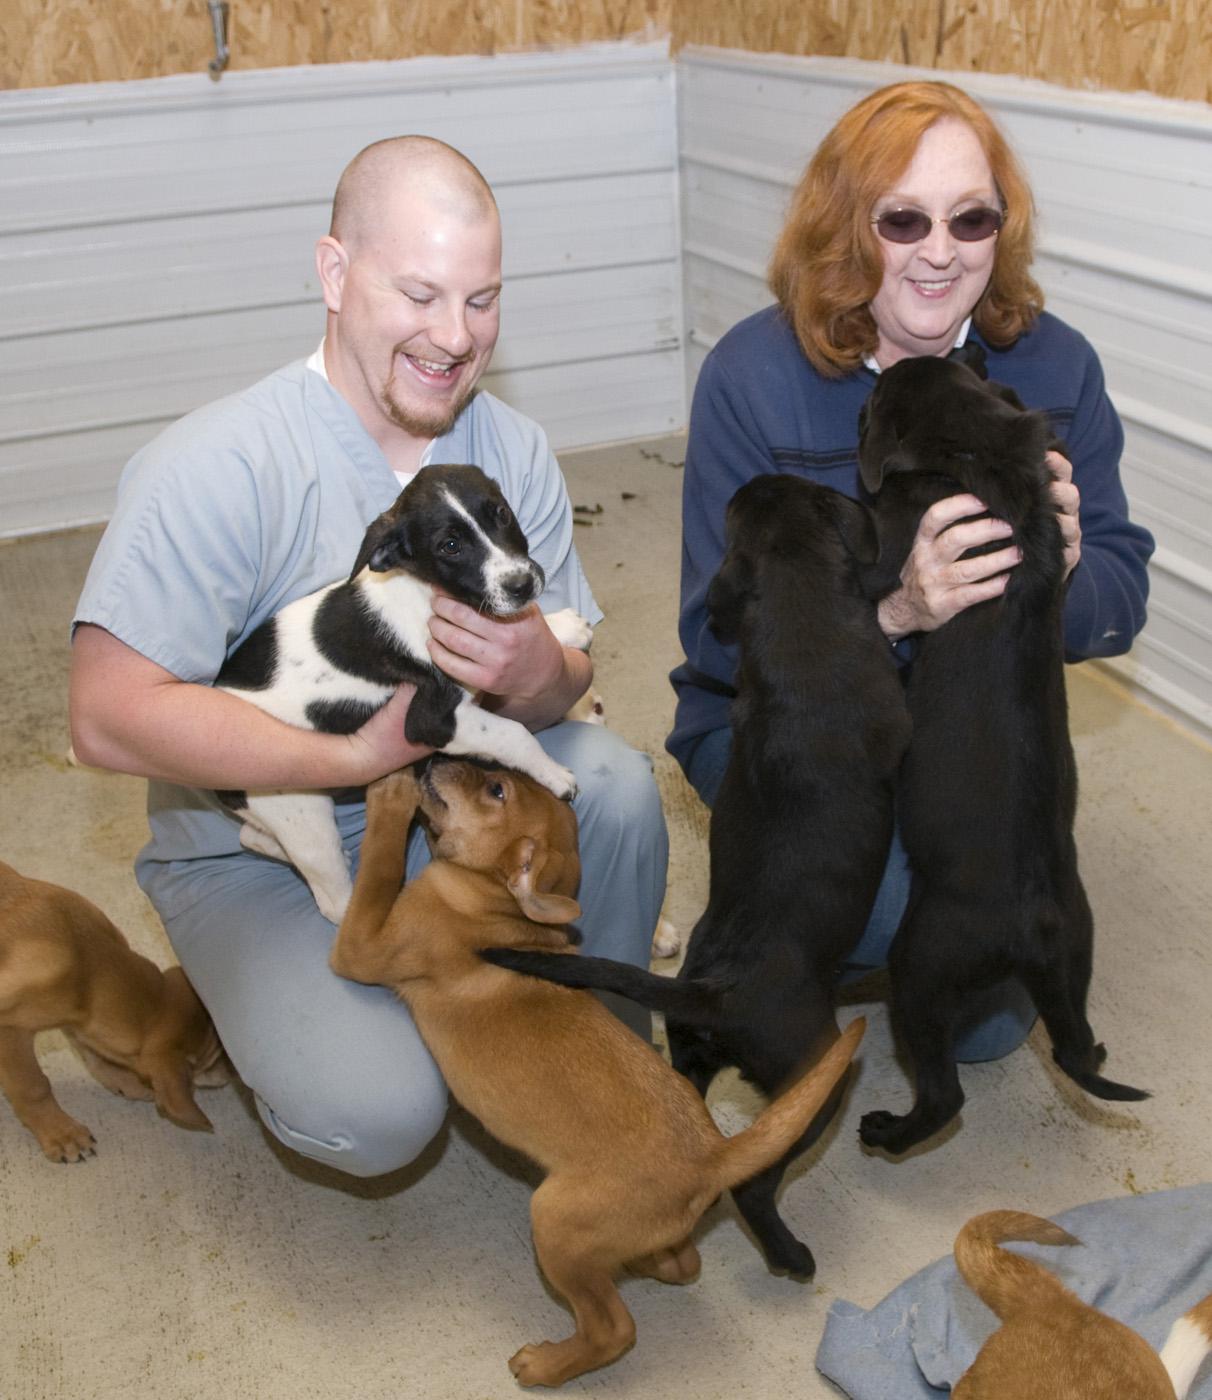 Mississippi State University veterinary medical student Wade Bowers of Memphis and Aberdeen animal shelter manager Astrid Peterson play with several of the dogs at the facility. (Photo by Tom Thompson)